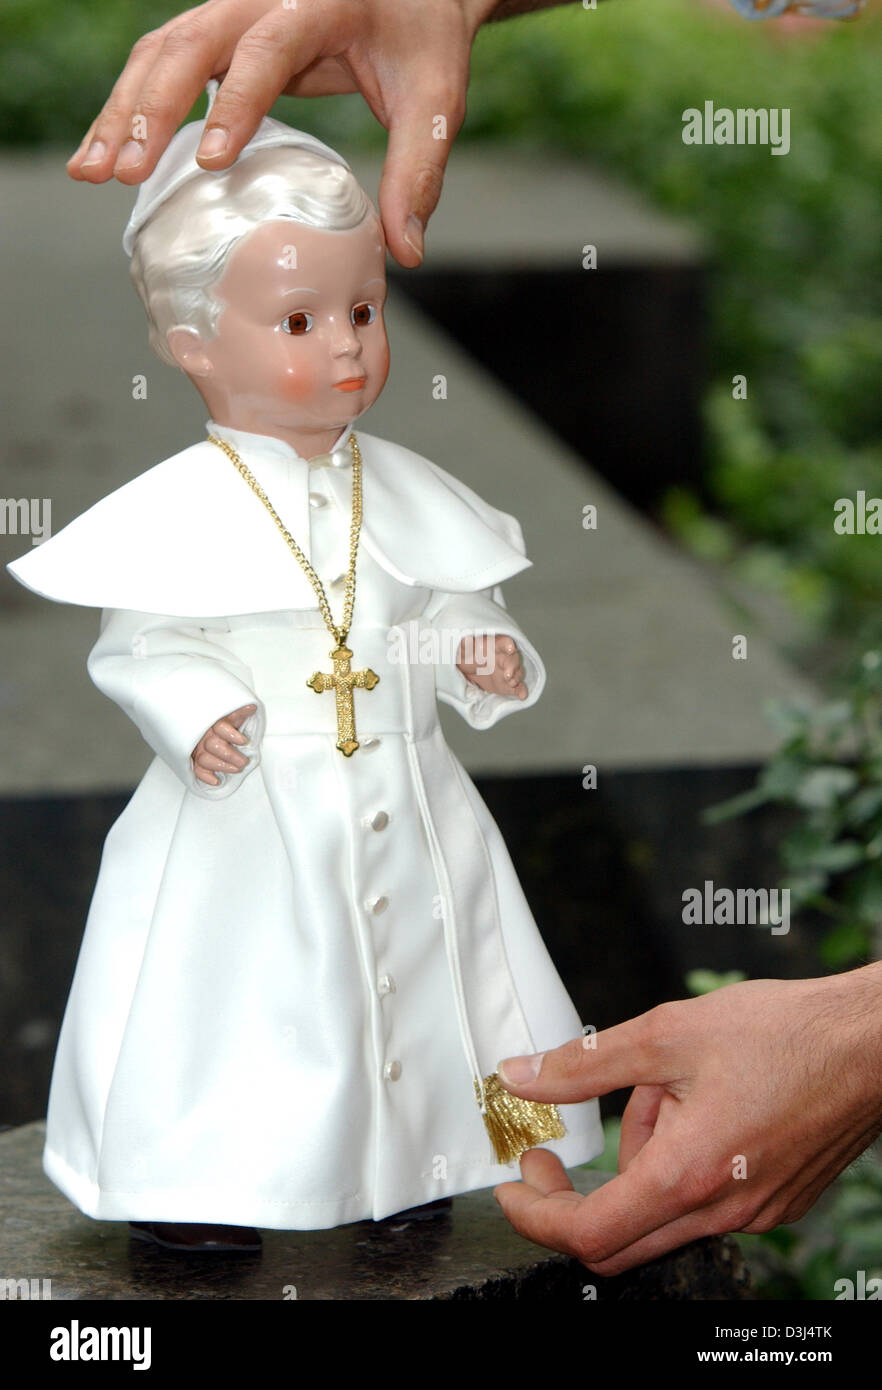 (dpa) - The picture shows the hands of Marcel Offermann, owner of the puppet hospital Neuss, holding a 41 centimetre tall design model of the Pope in Neuss, Germany, Monday 06 June 2005. Together with puppet producer Schildkroet Offermann was responsible for the puppet's design. Arms and legs of the puppet are flexible. The clothes were made according to the real Pope's official cl Stock Photo